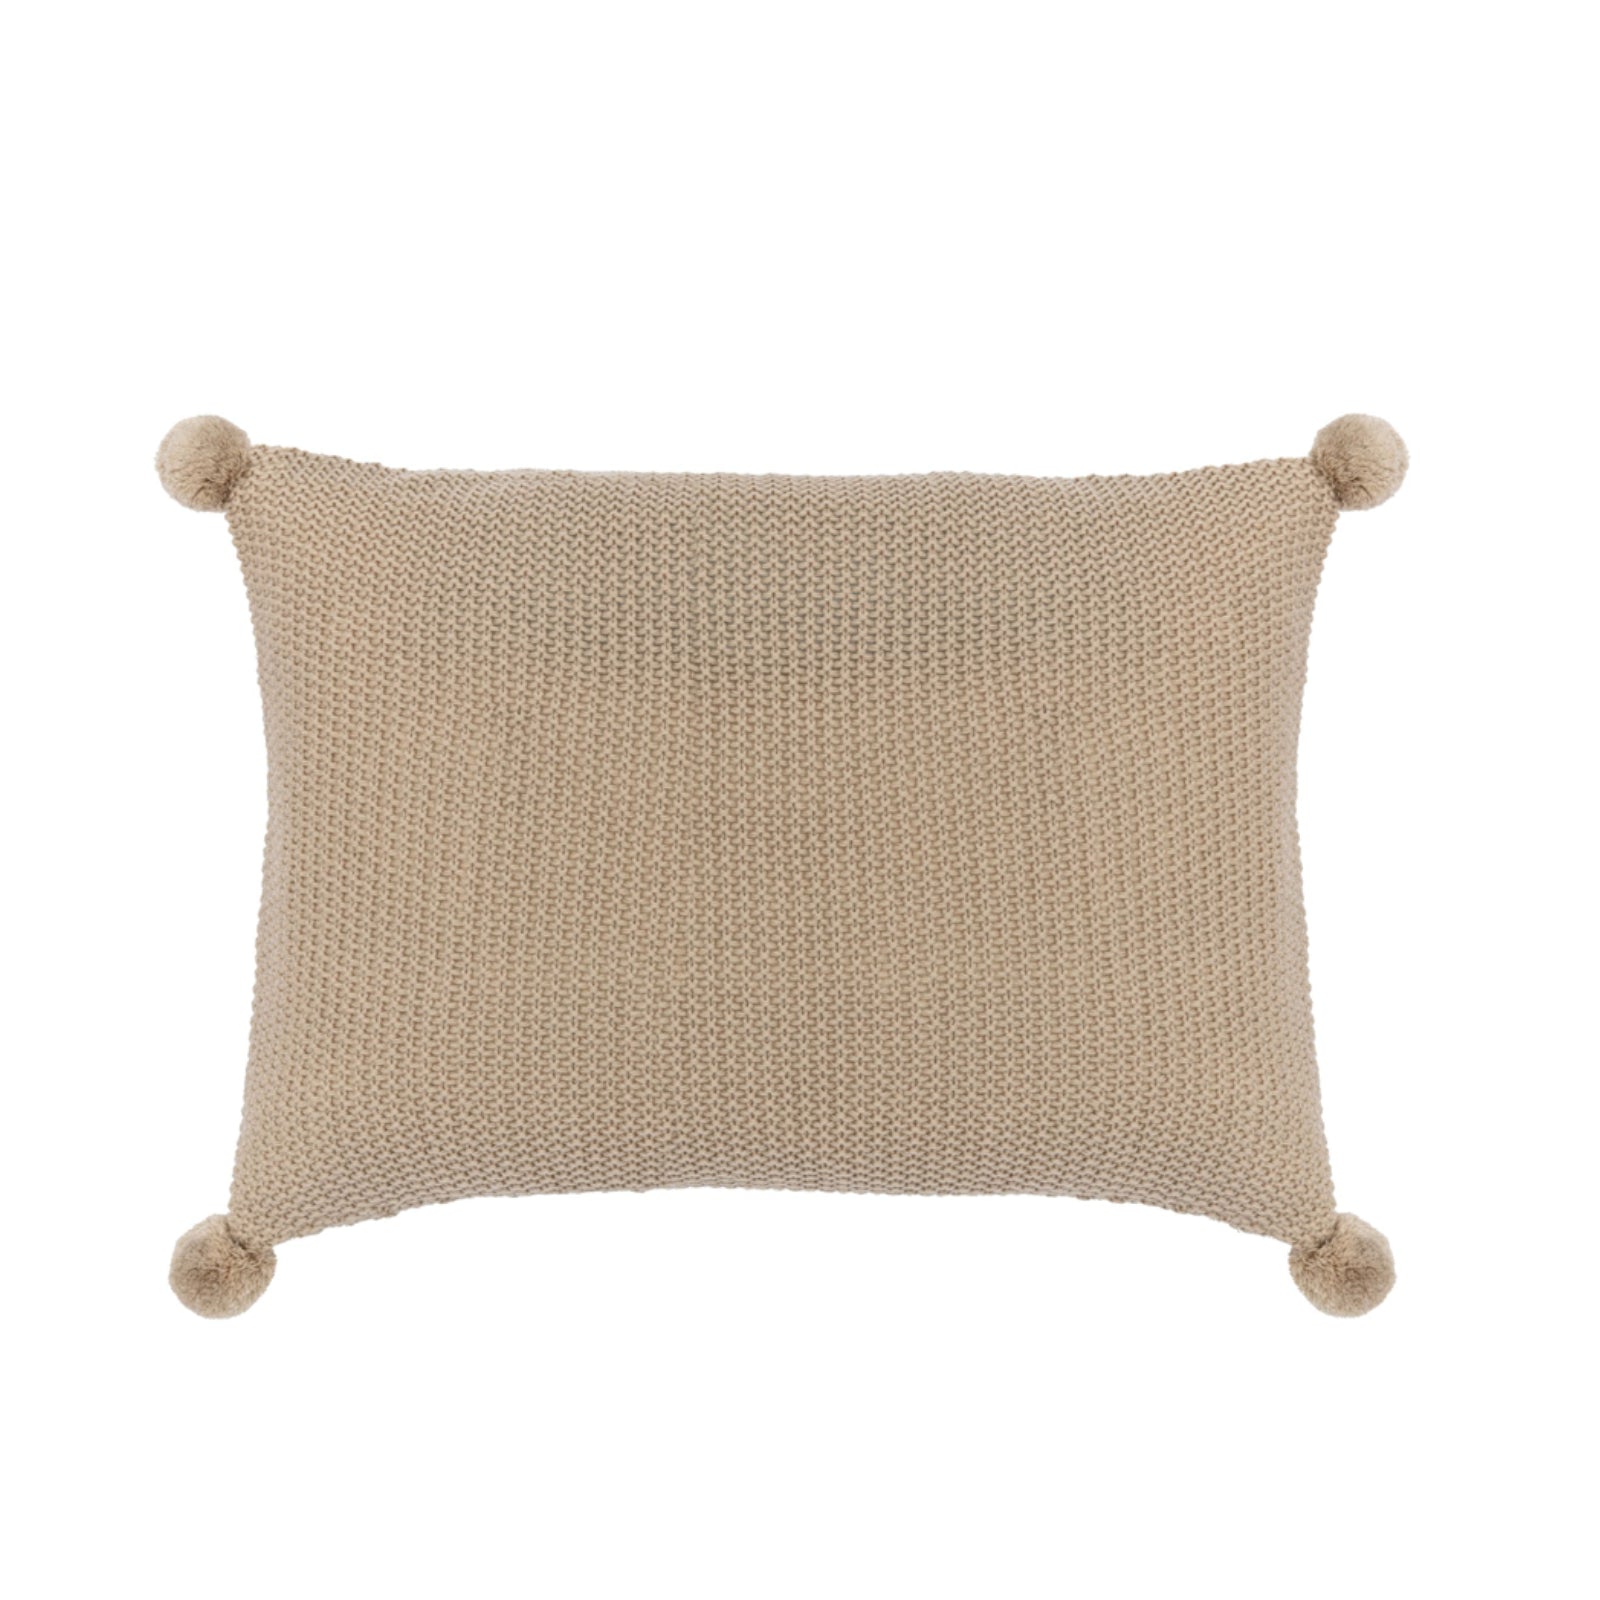 Natural Tone Pom Pom Cushion Cover - The Farthing